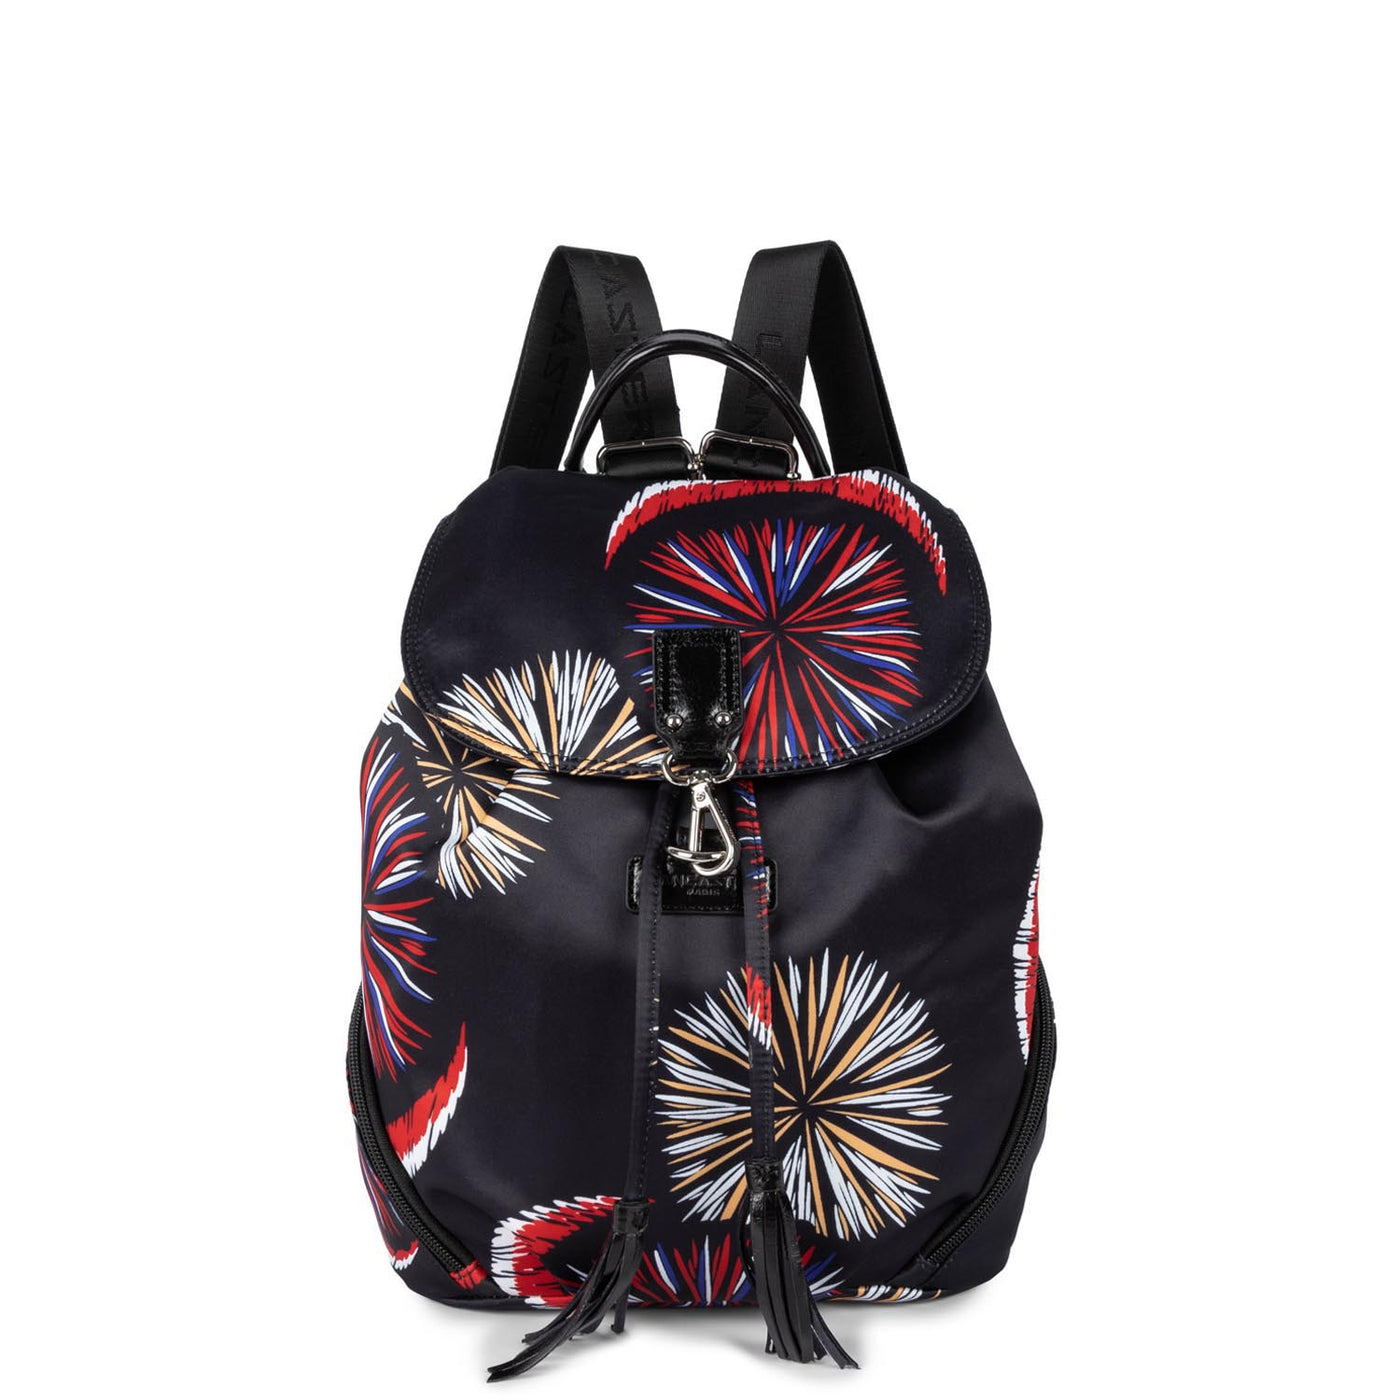 backpack - basic pompon #couleur_artifice